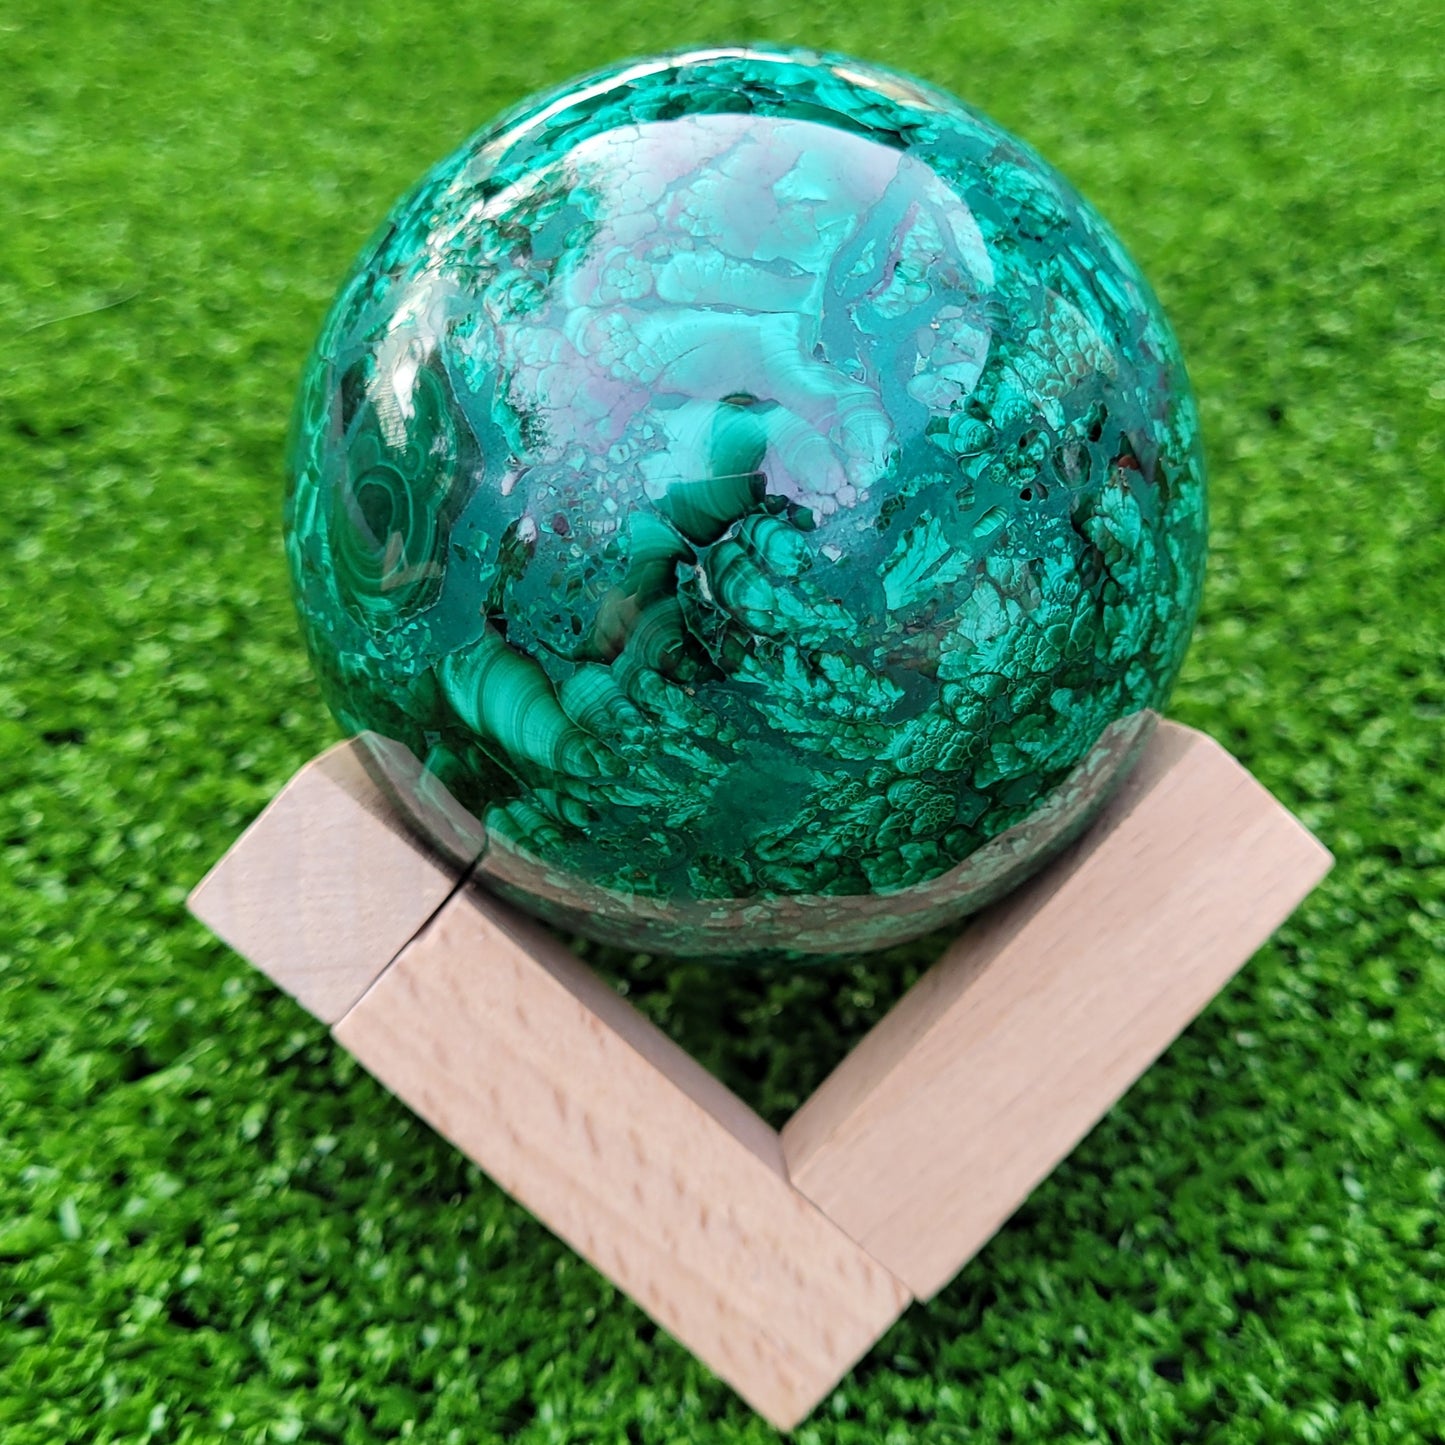 Wood V-Shaped Sphere Display Stands to Choose From for Spheres 2.3" to 8" (58mm to 178mm)